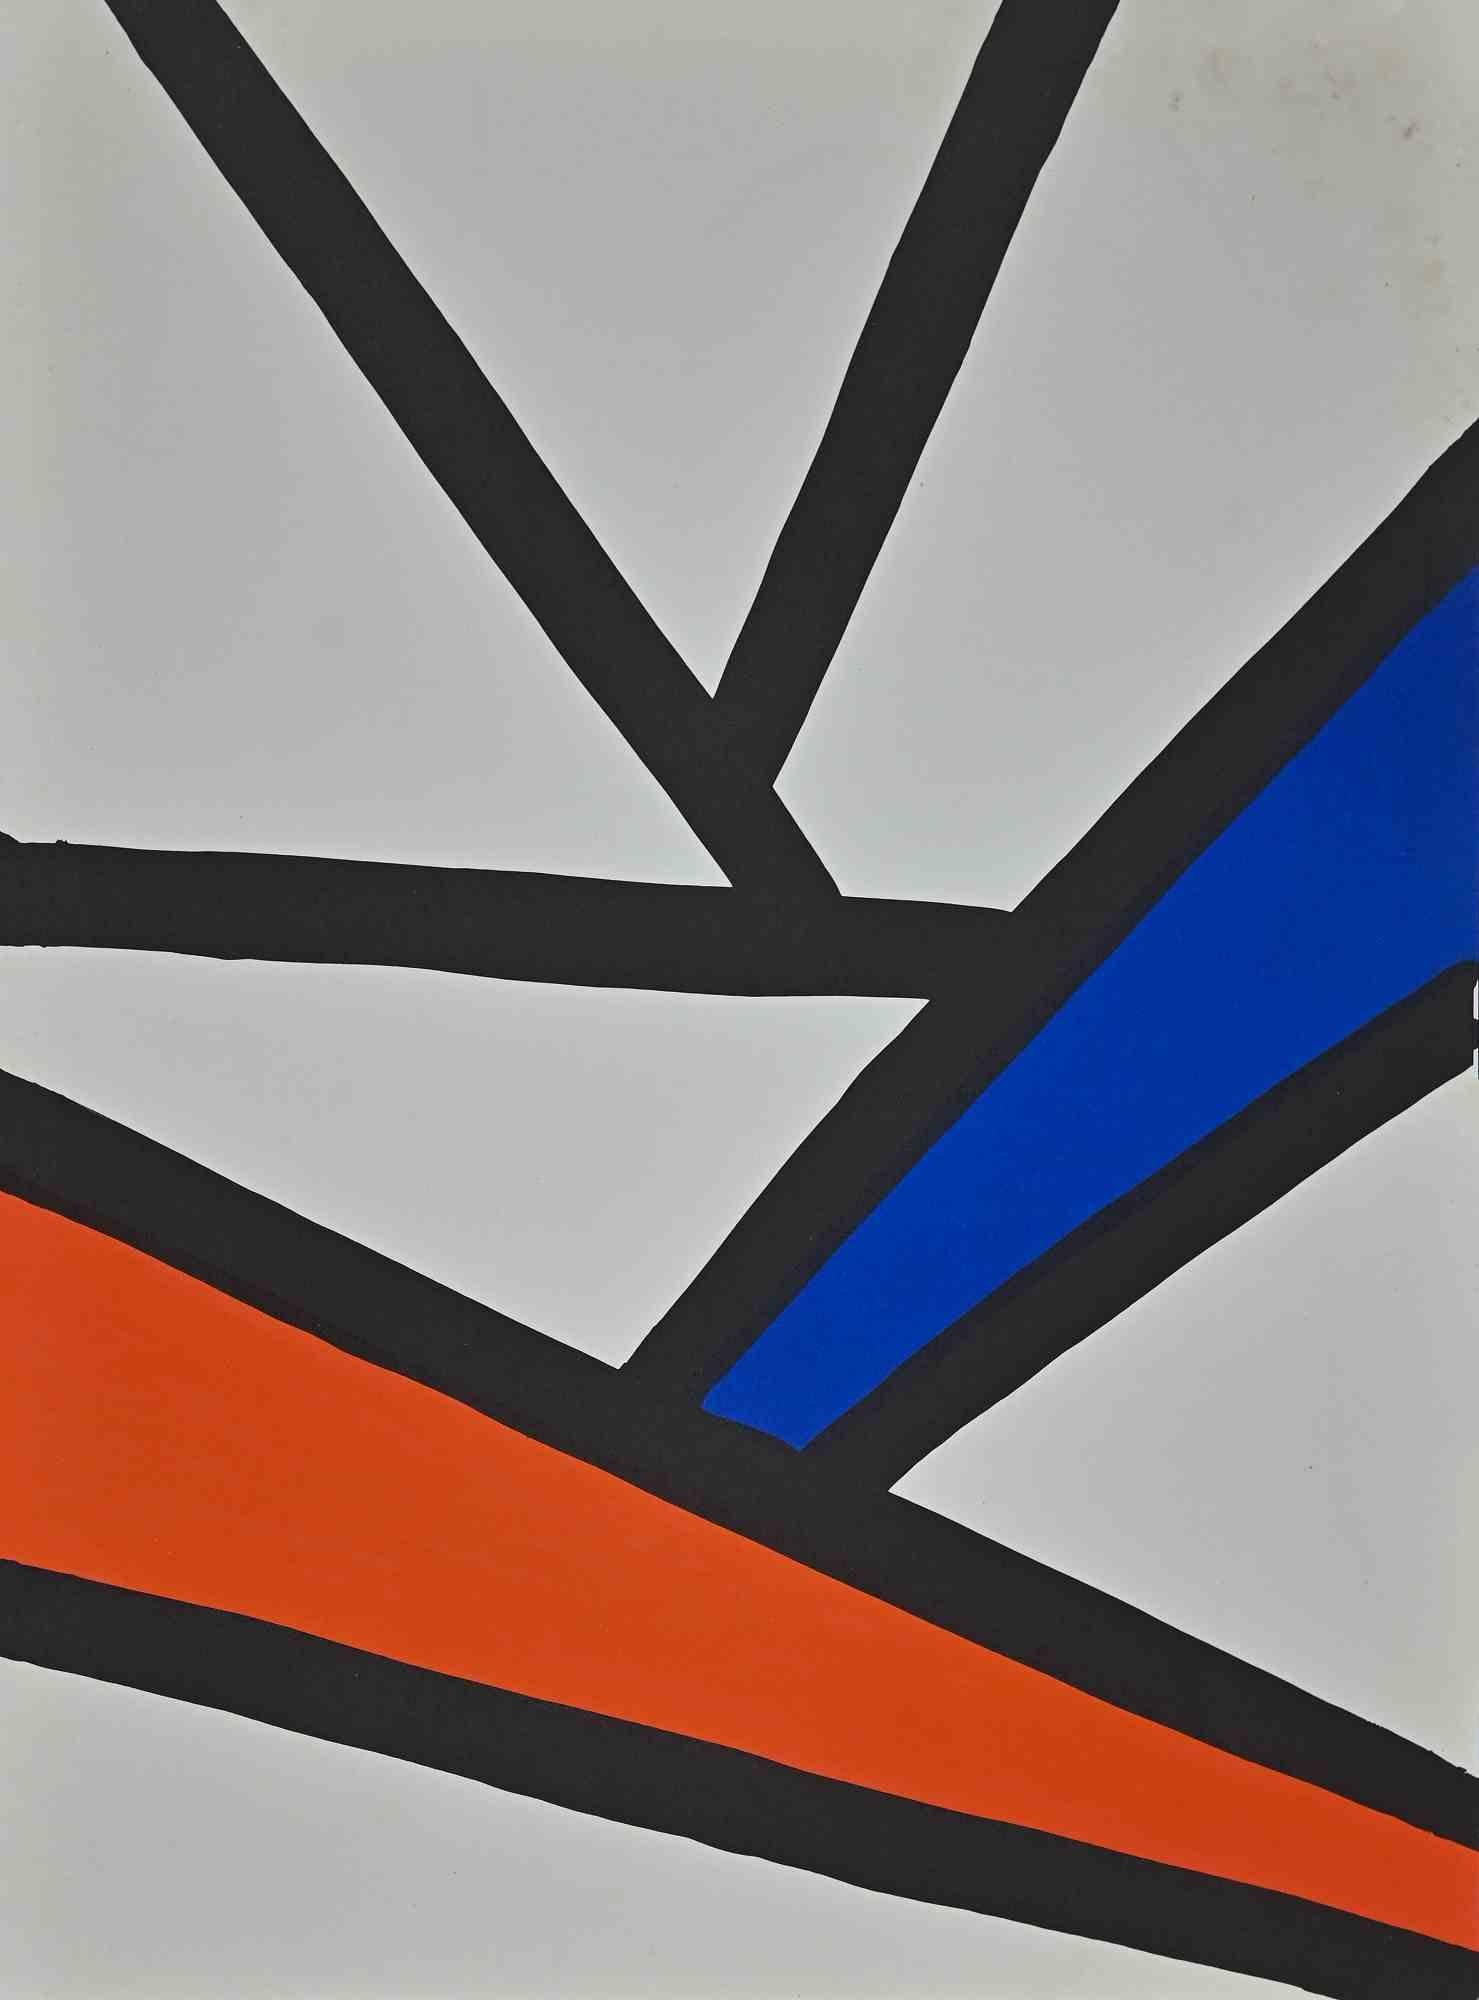 Composition  is a  lithograph print realized after Alexander Calder in 1968.

The artwork shows abstract shapes in vivid colors is typical of the artist's style.

Good conditions with slight foxing and a very small cut on the lower.

On the back of